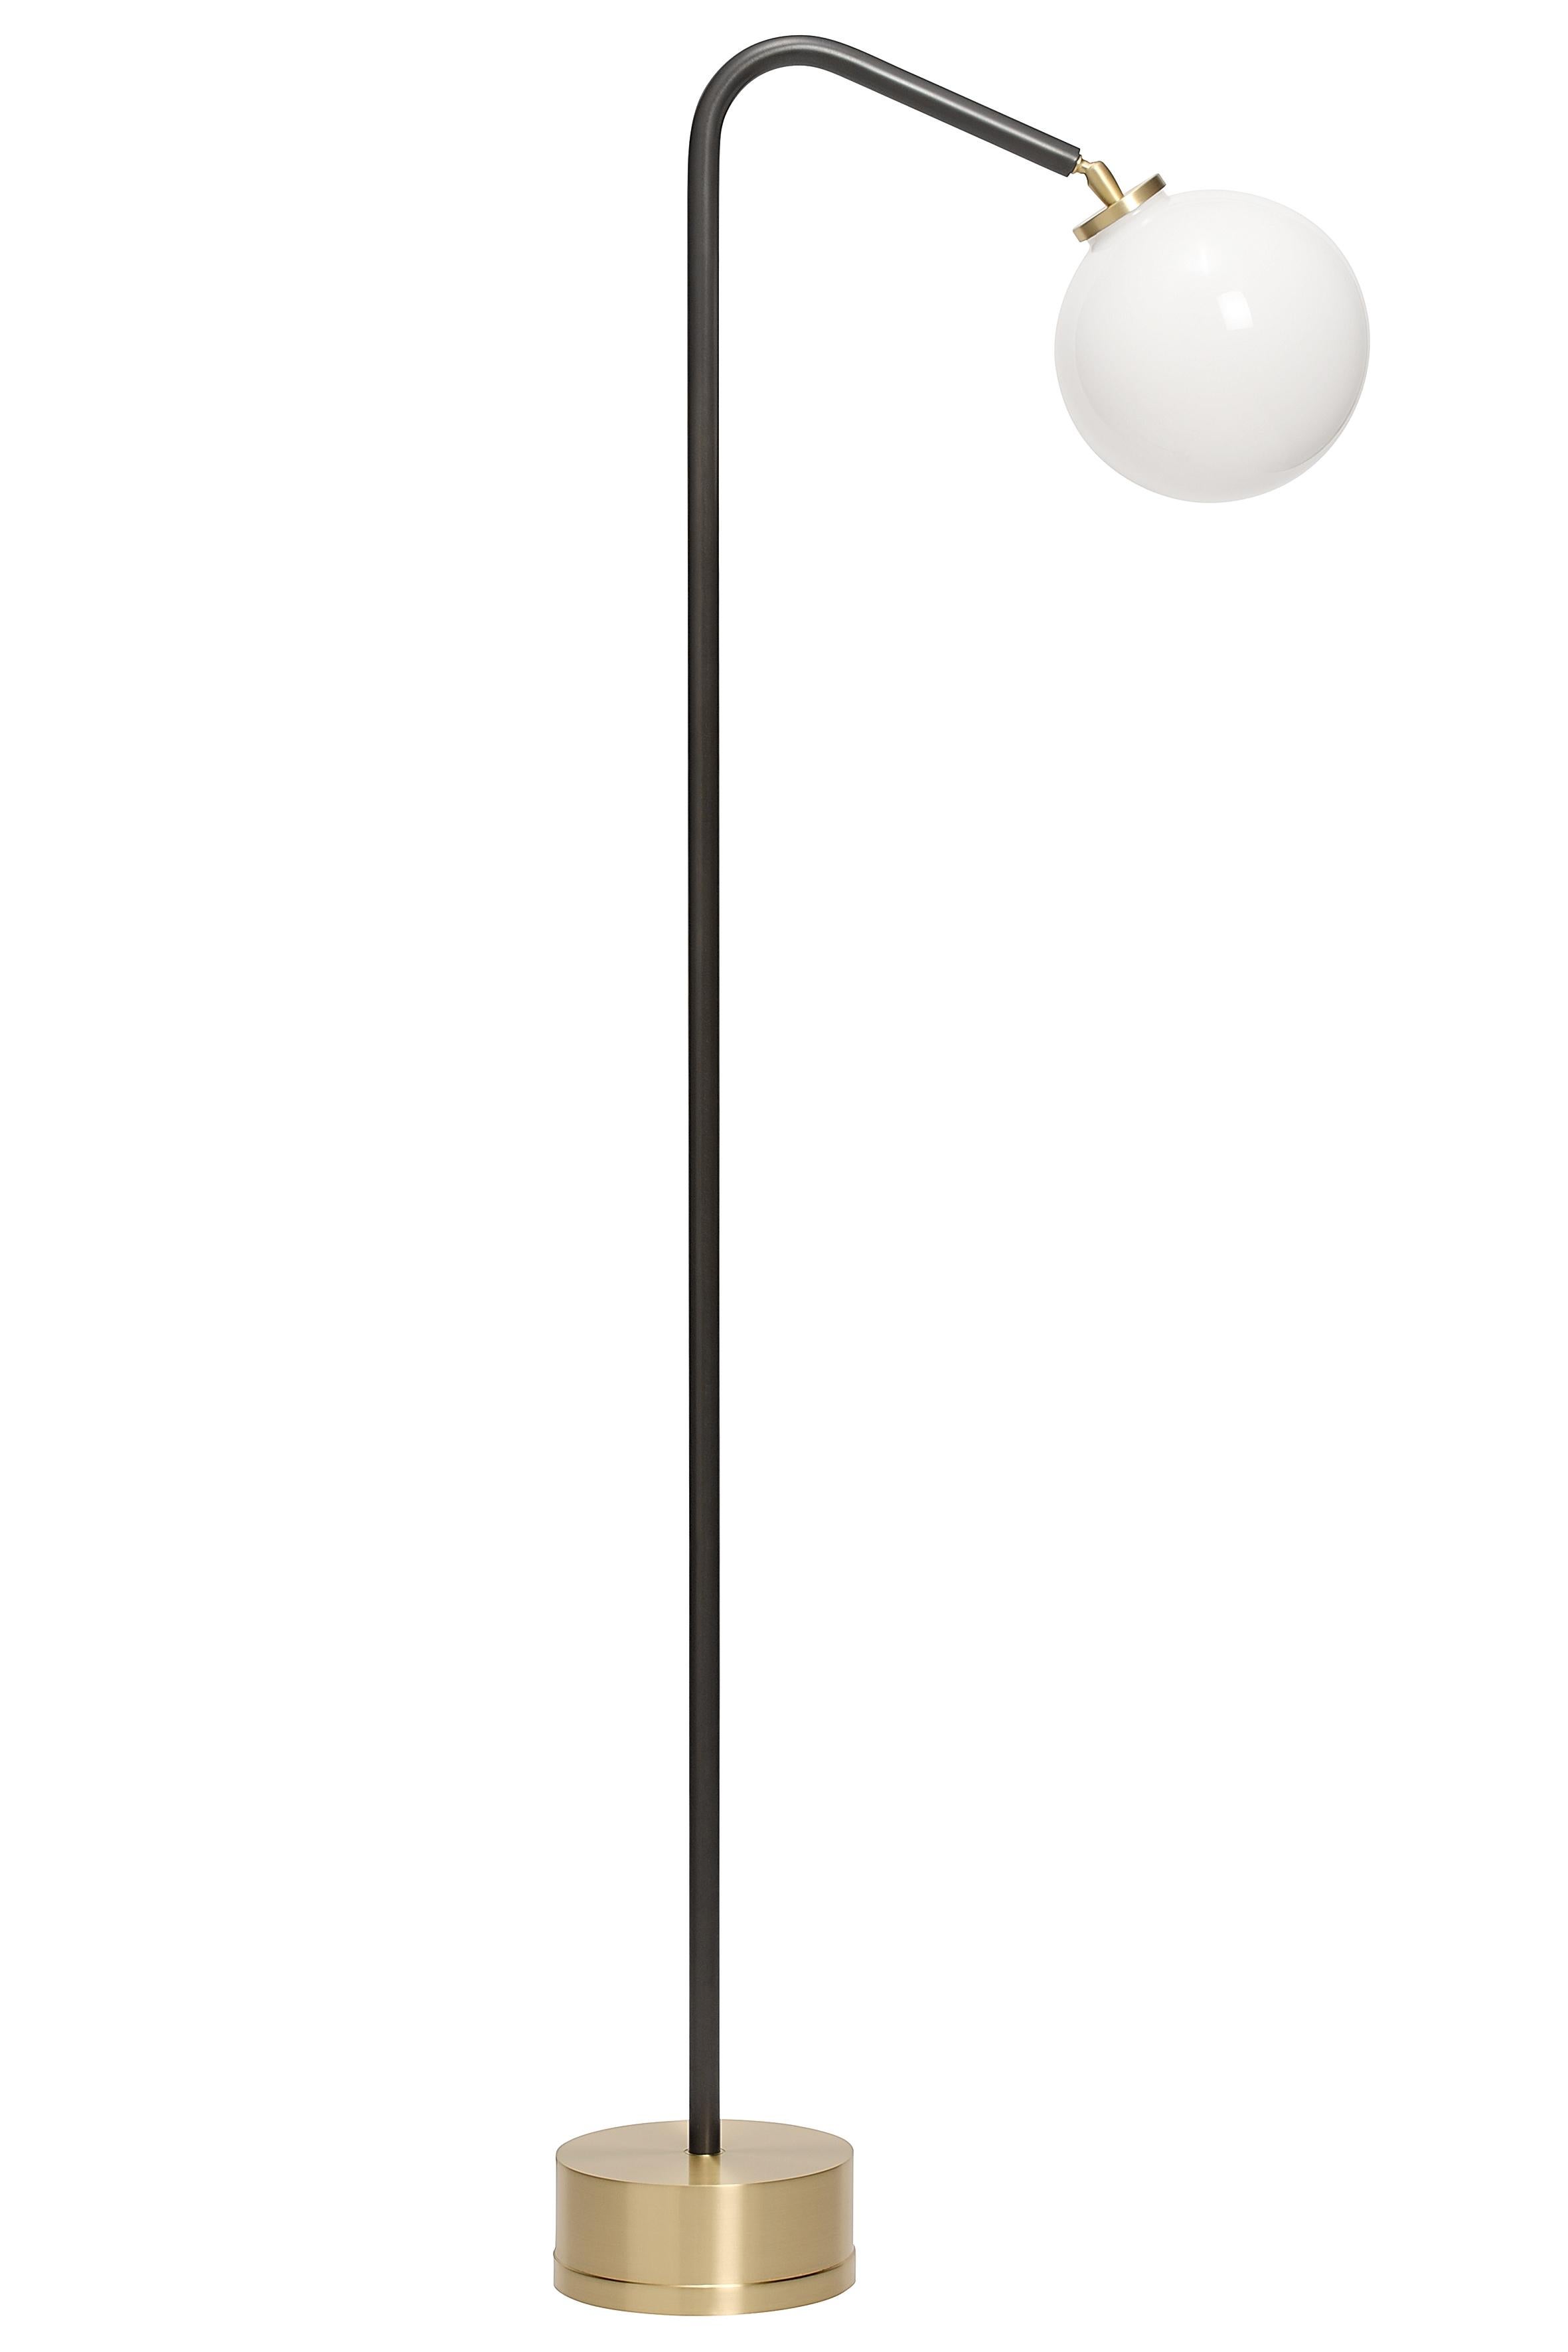 Oscar floor lamp by CTO Lighting
Materials: bronze stem with satin brass base and opal glass shade
Also available in satin brass stem with satin brass base with opal glass shade
Dimensions: H 133 x W 34 cm 

All our lamps can be wired according to